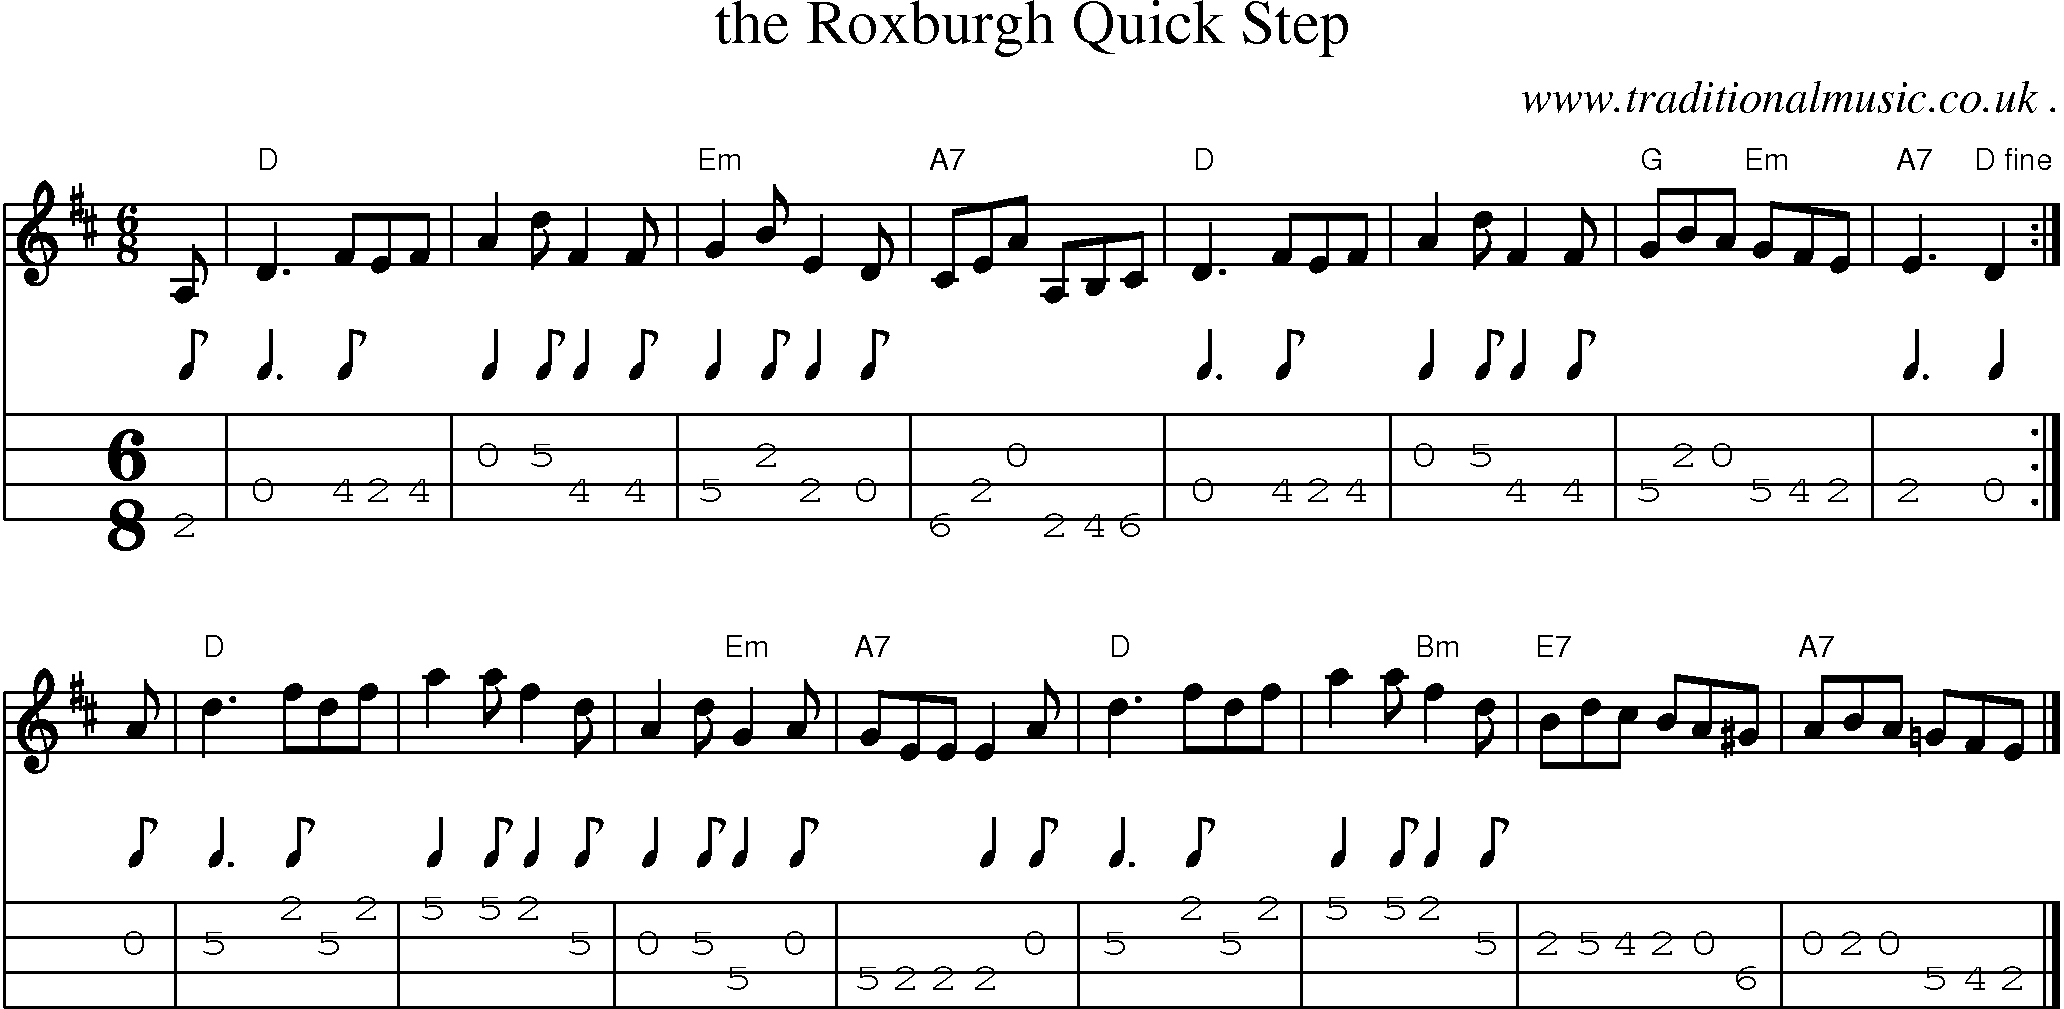 Sheet-music  score, Chords and Mandolin Tabs for The Roxburgh Quick Step